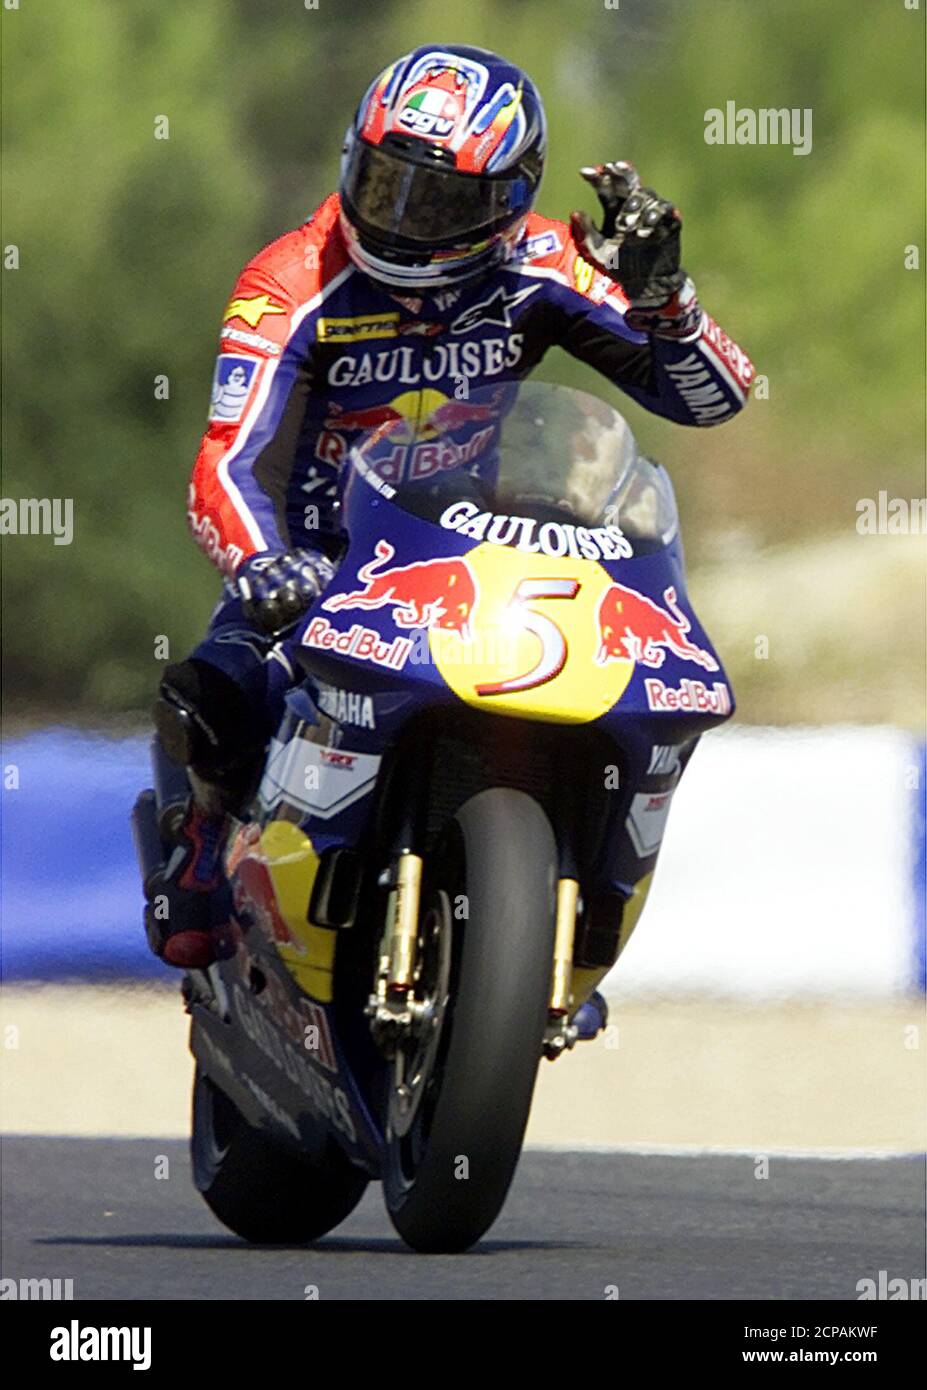 Italian 500cc motorcyclist Valentino Rossi gestures crossing the finish  line and winning the Portuguese Grand Prix September 9, 2001. Valentino  Rossi, riding a Honda, won the race in 47 minutes 25.357 seconds.